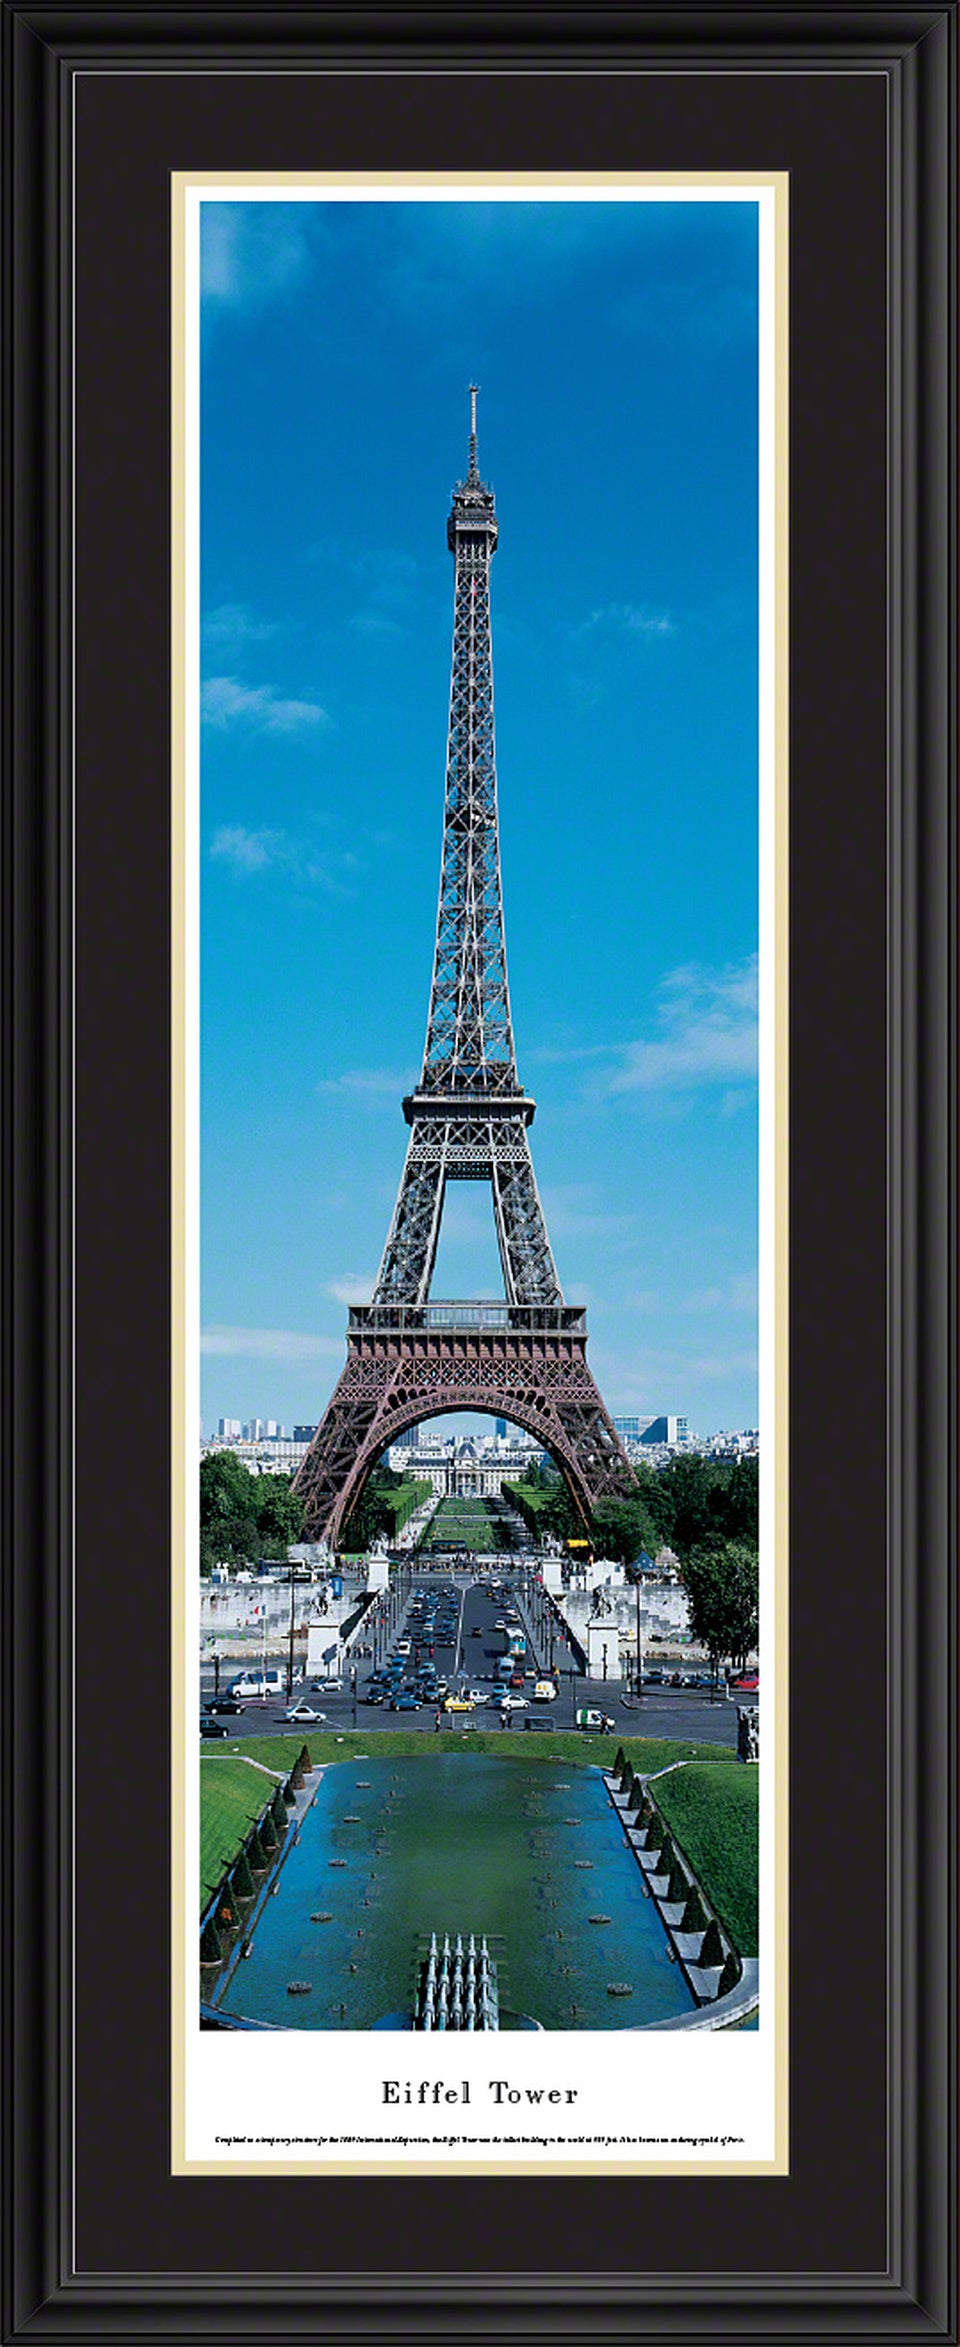 Eiffel Tower Panoramic Picture - Day - Vertical Panorama by Blakeway Panoramas